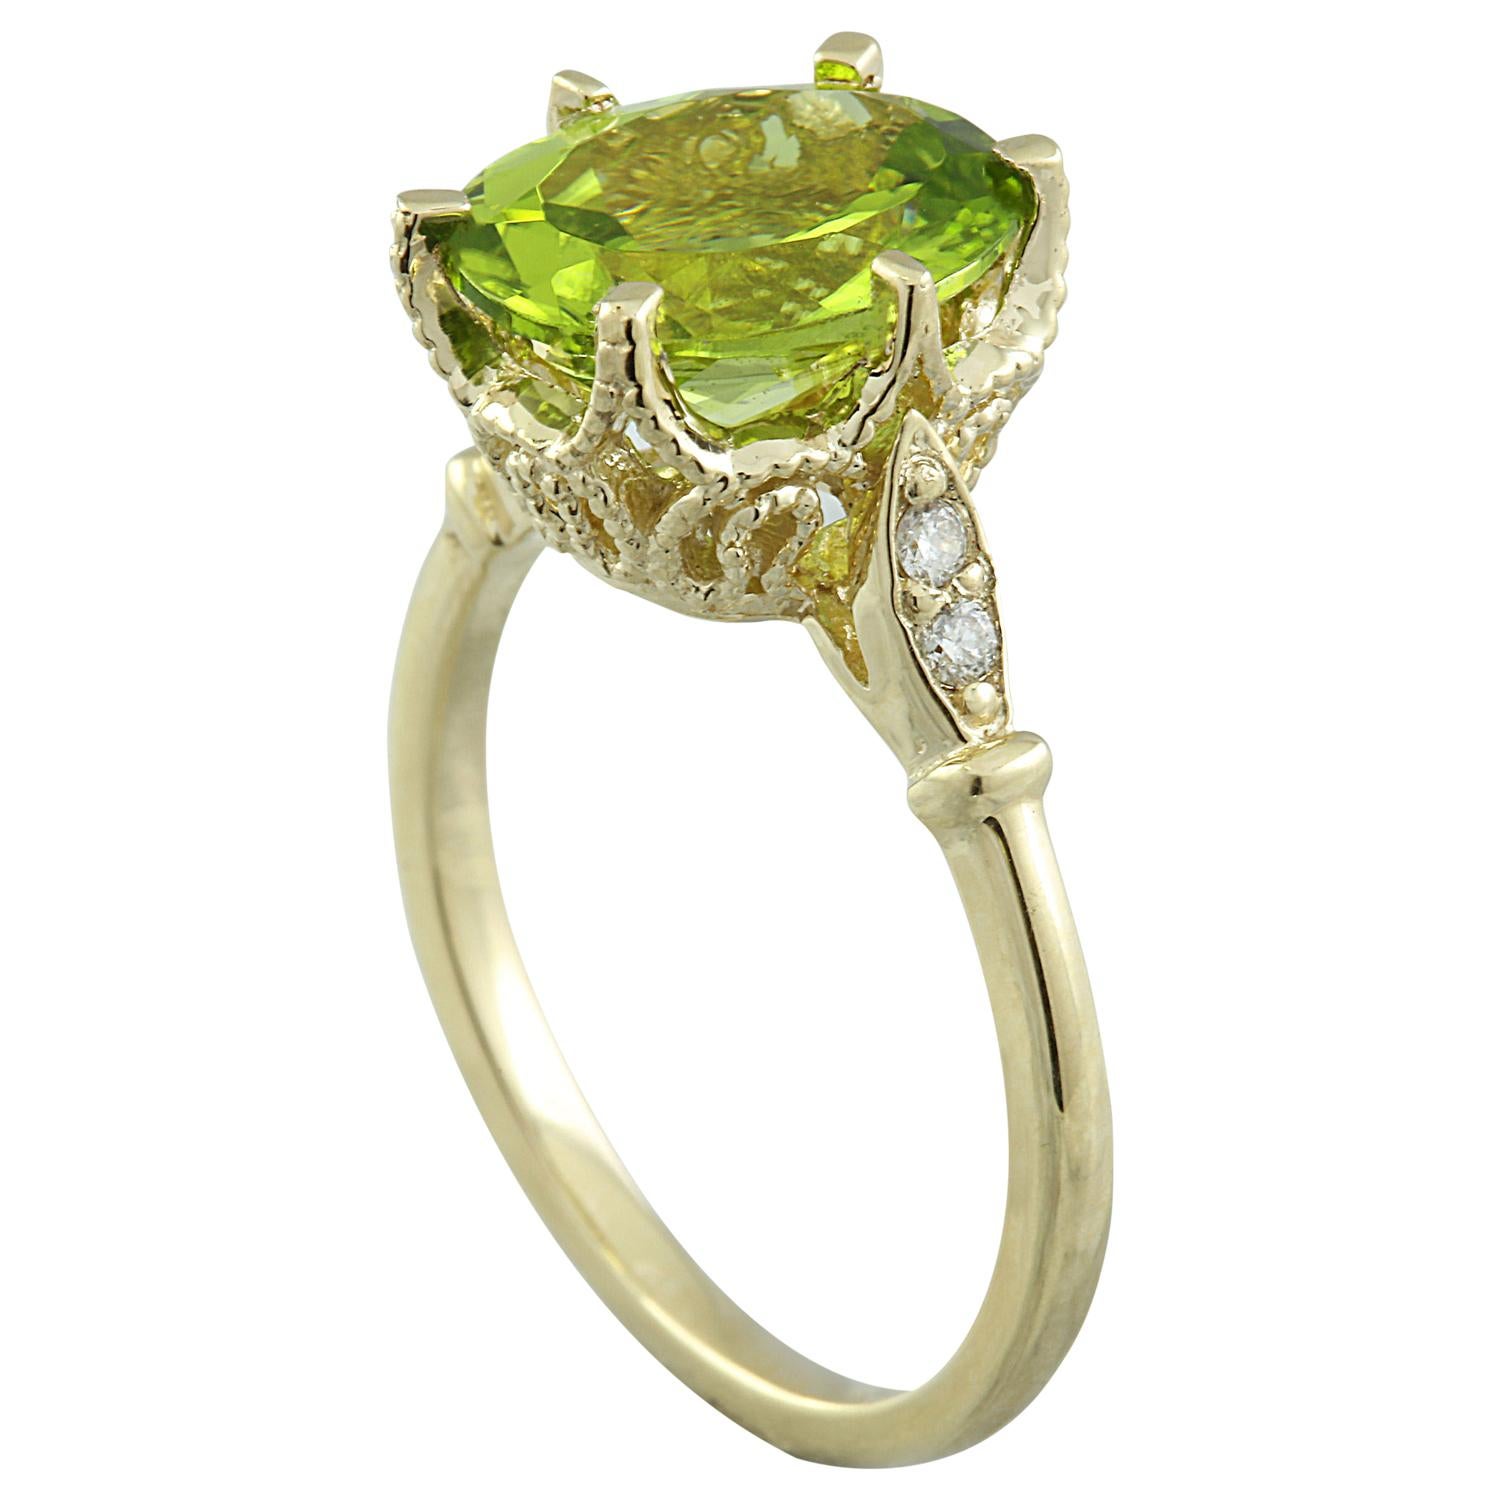 Oval Cut Natural Peridot Diamond Ring In 14 Karat Yellow Gold For Sale